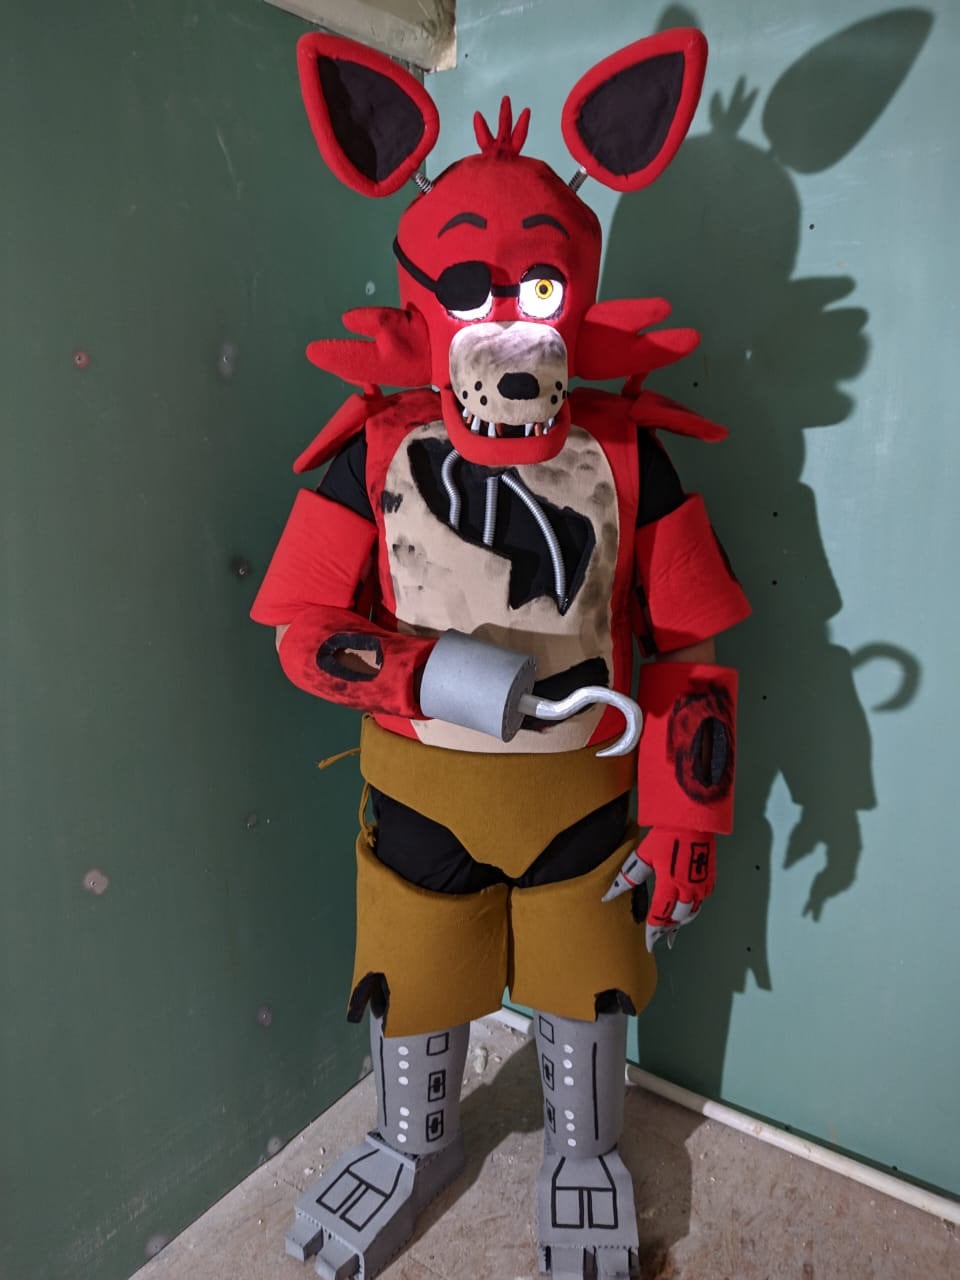 3D file FIVE NIGHTS AT FREDDY'S Nightmare Foxy FILES FOR COSPLAY